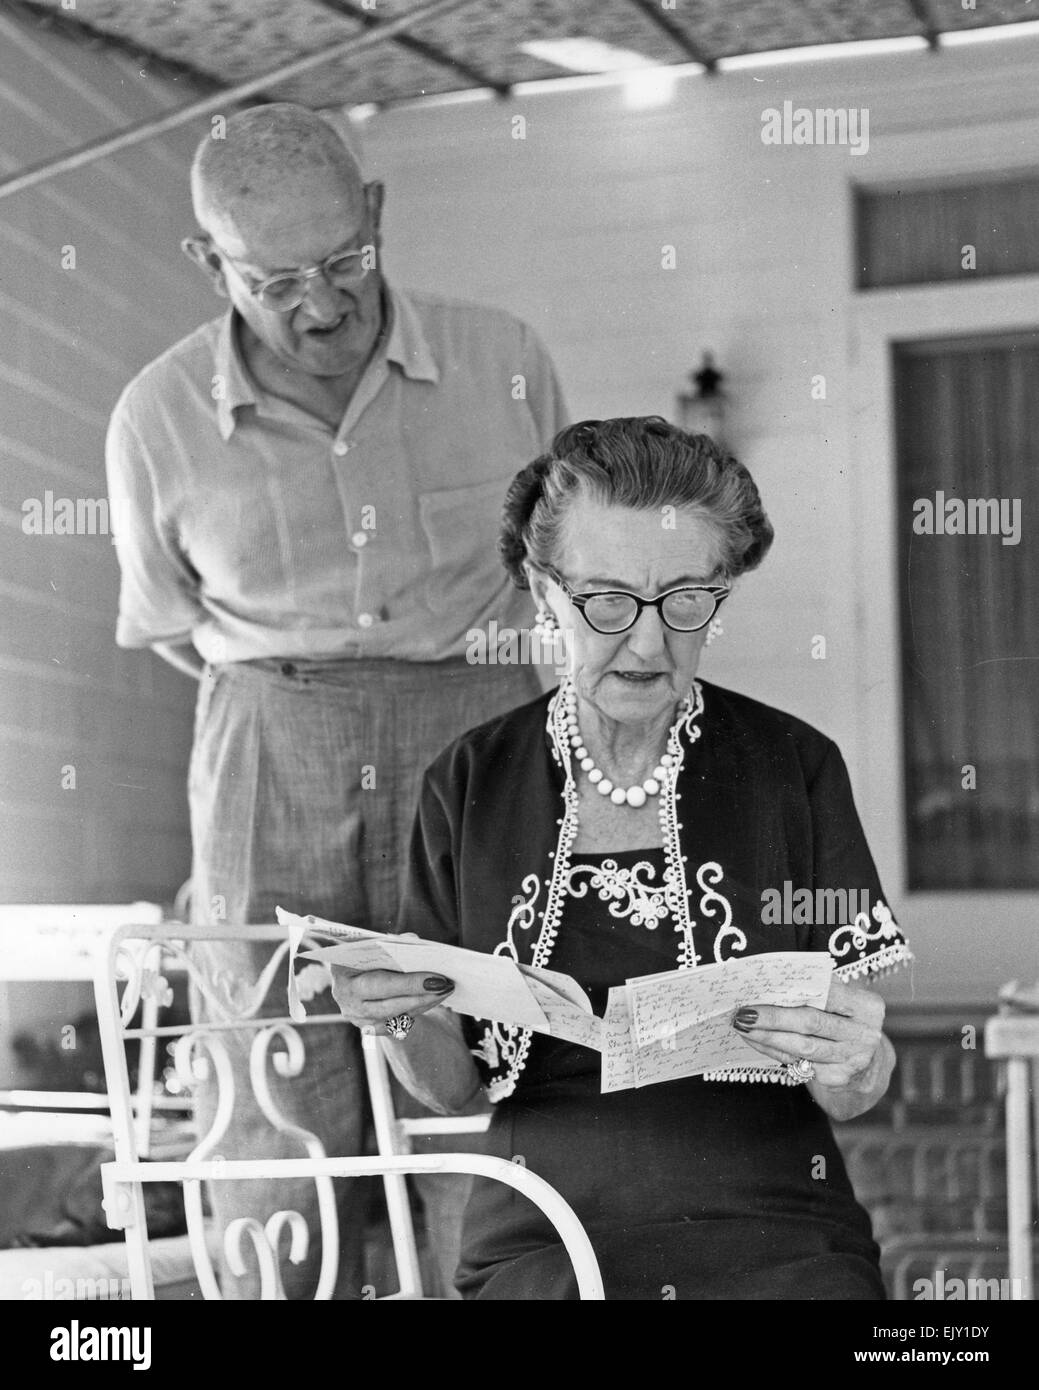 P.G.WODEHOUSE (1881-1975) English humourist with his wife Ethel at their house in Basket Neck Lane, Remsenburg, New York, about 1956. Photo Graphic House 6640J Stock Photo